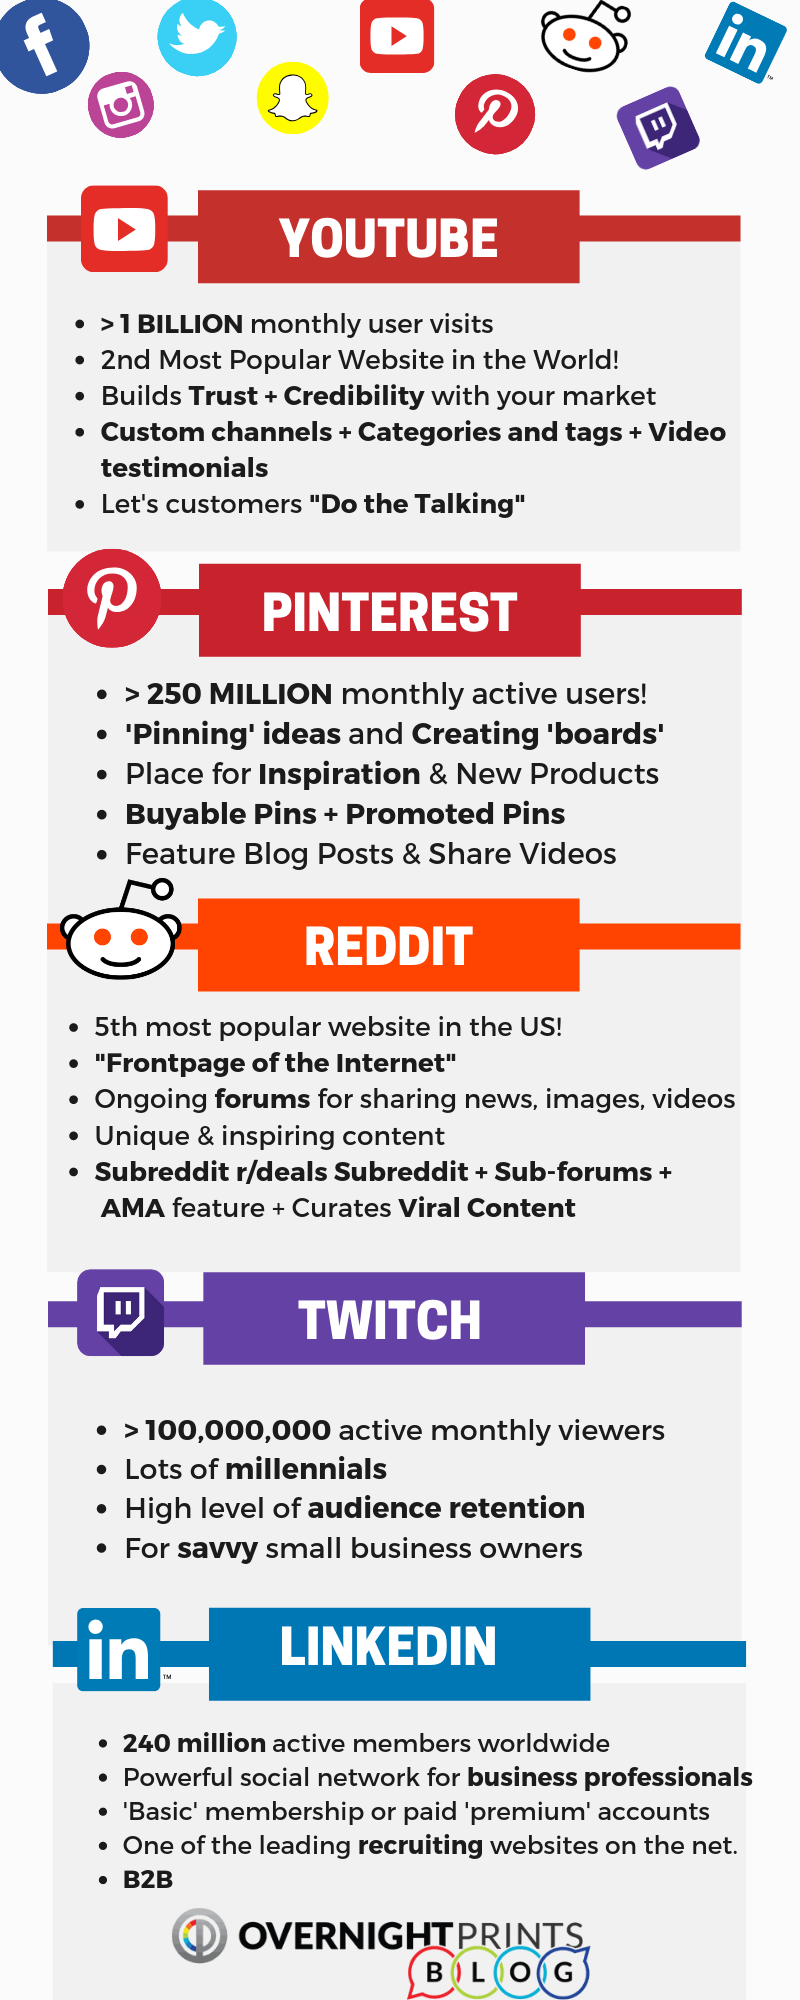 Infographic - 9 best Social Media platforms for small businesses by overnightprints.com - part 2